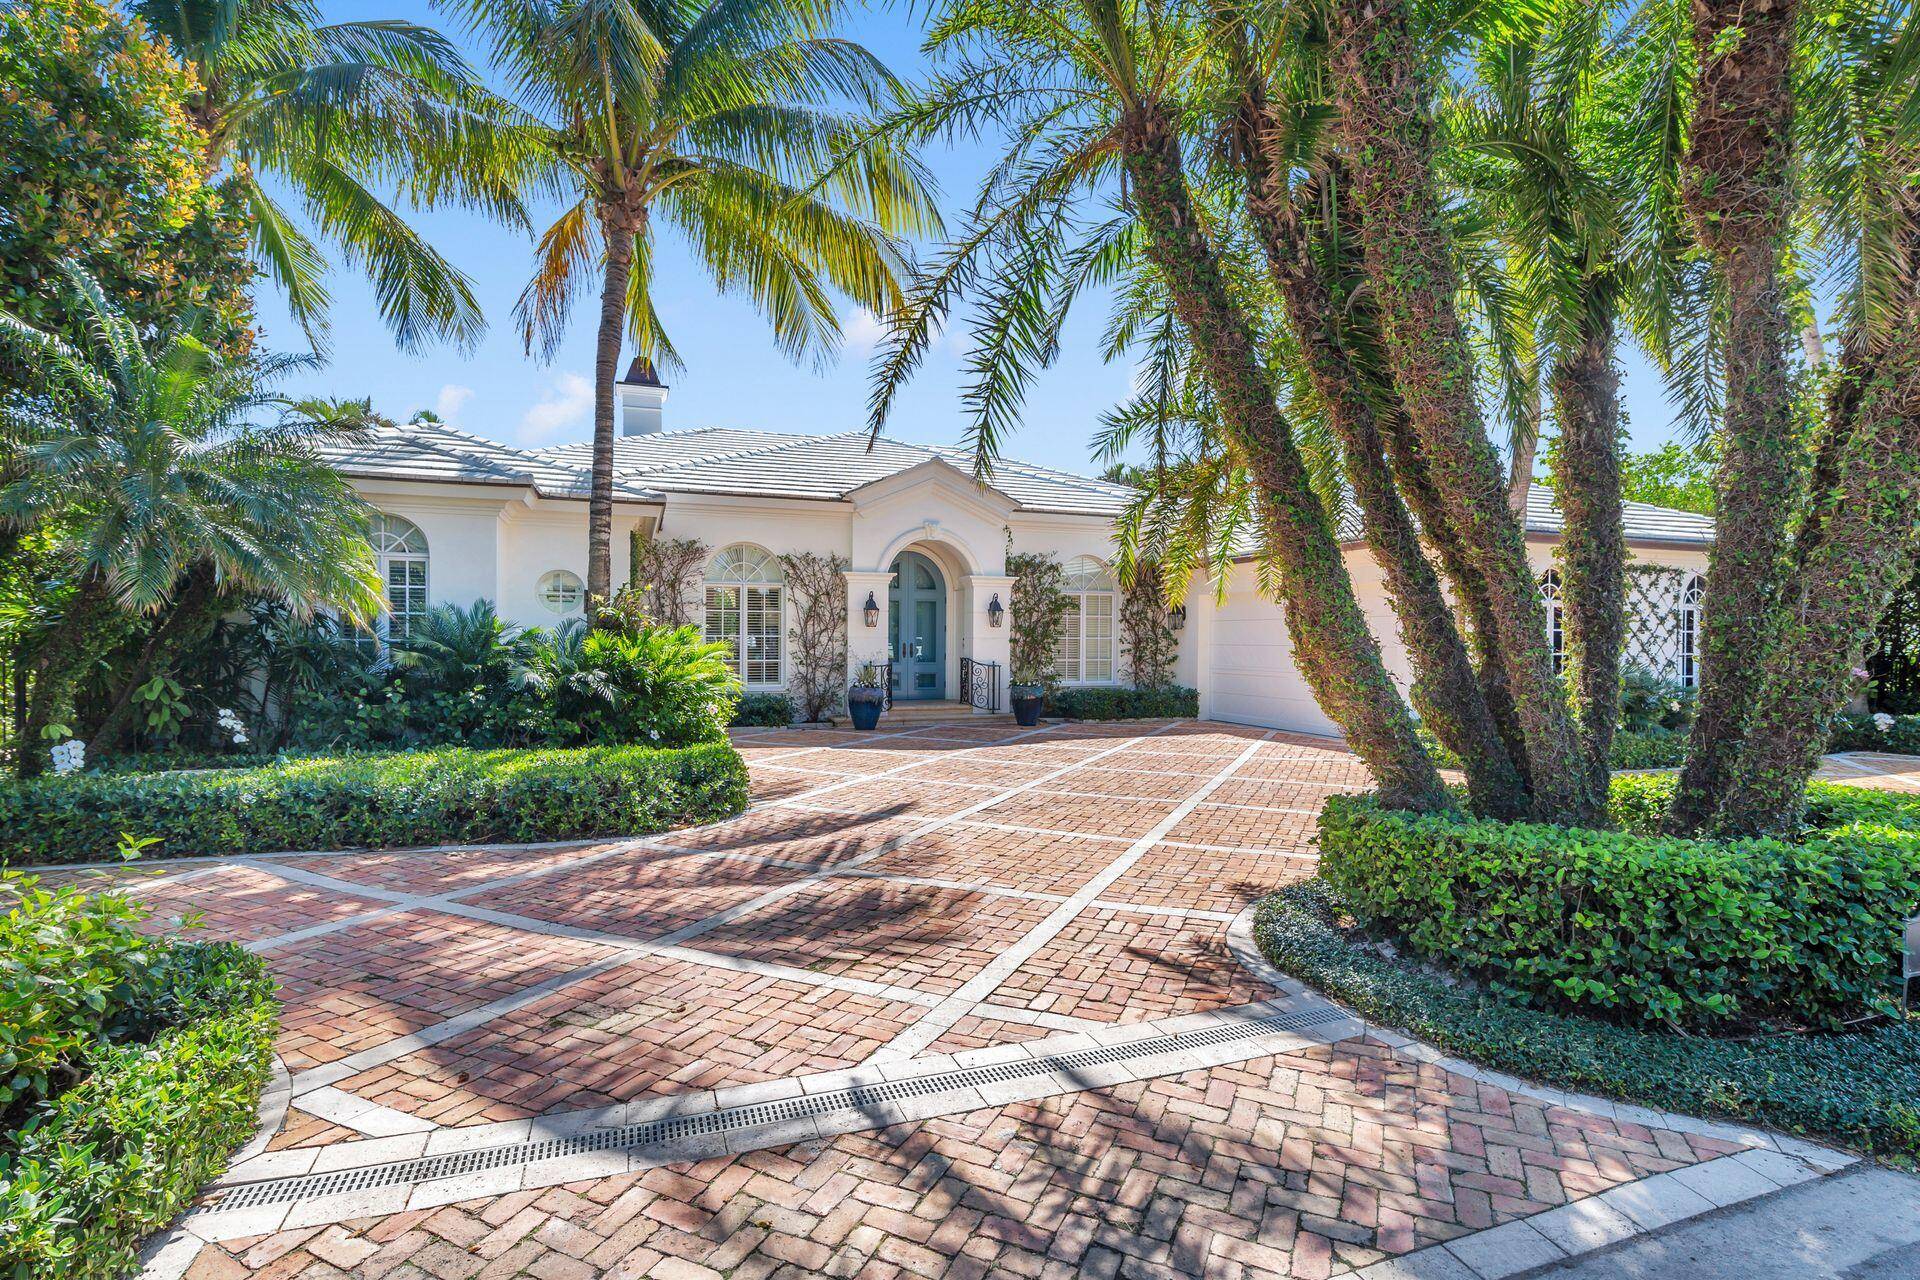 Exquisite Palm Beach home is now available for sale on one of the best streets in the North End of the Island.